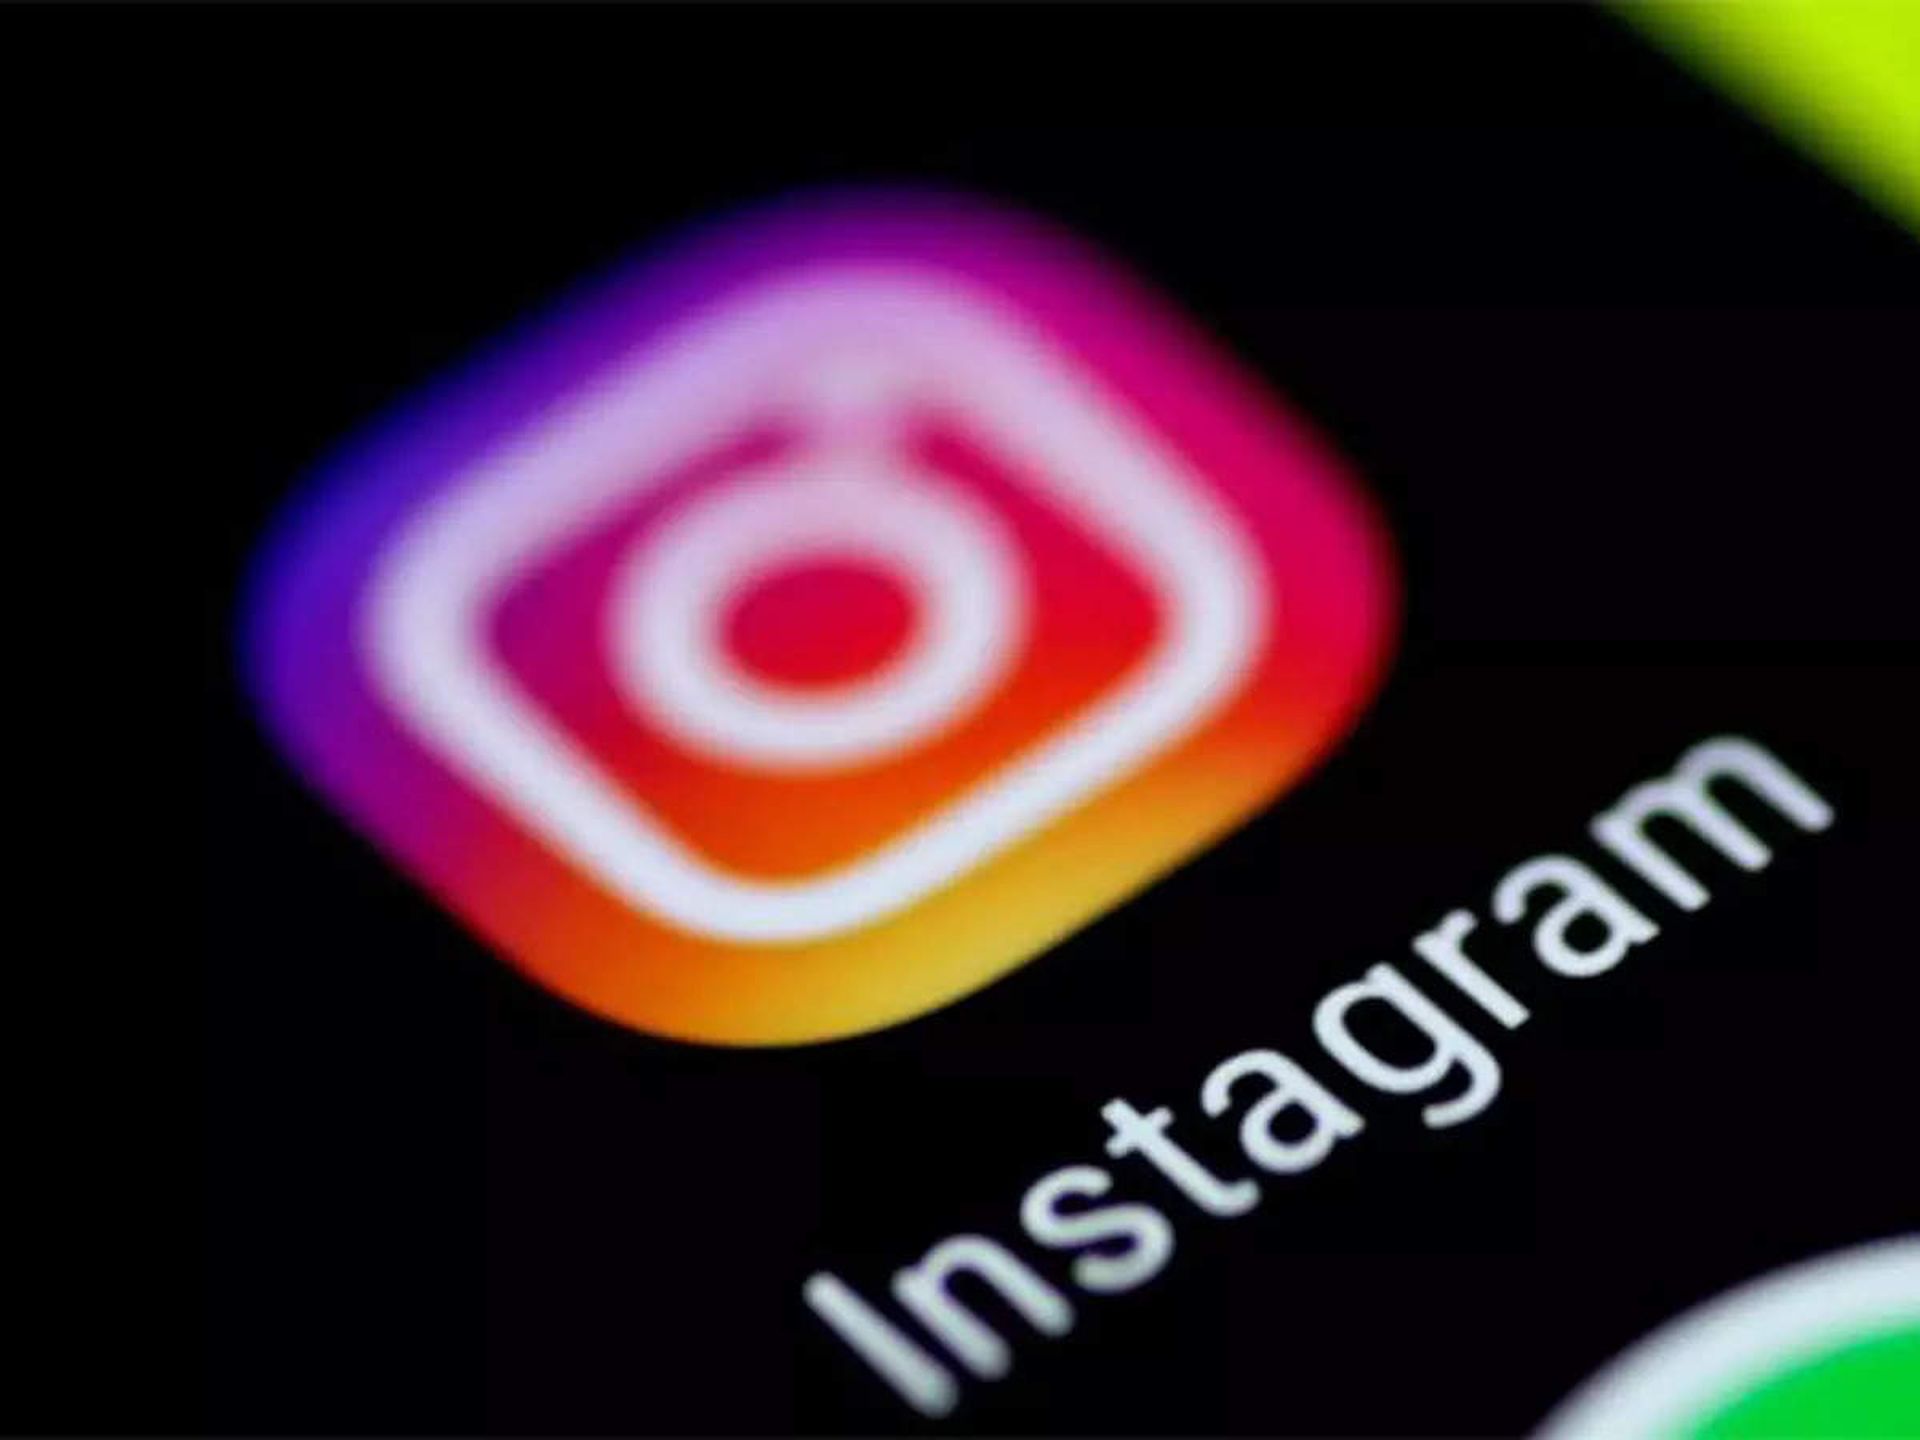 The Instagram Trend Predictions Report for 2023 was recently released, and it attempts to highlight the top, emerging trends for the future year among Gen Z...